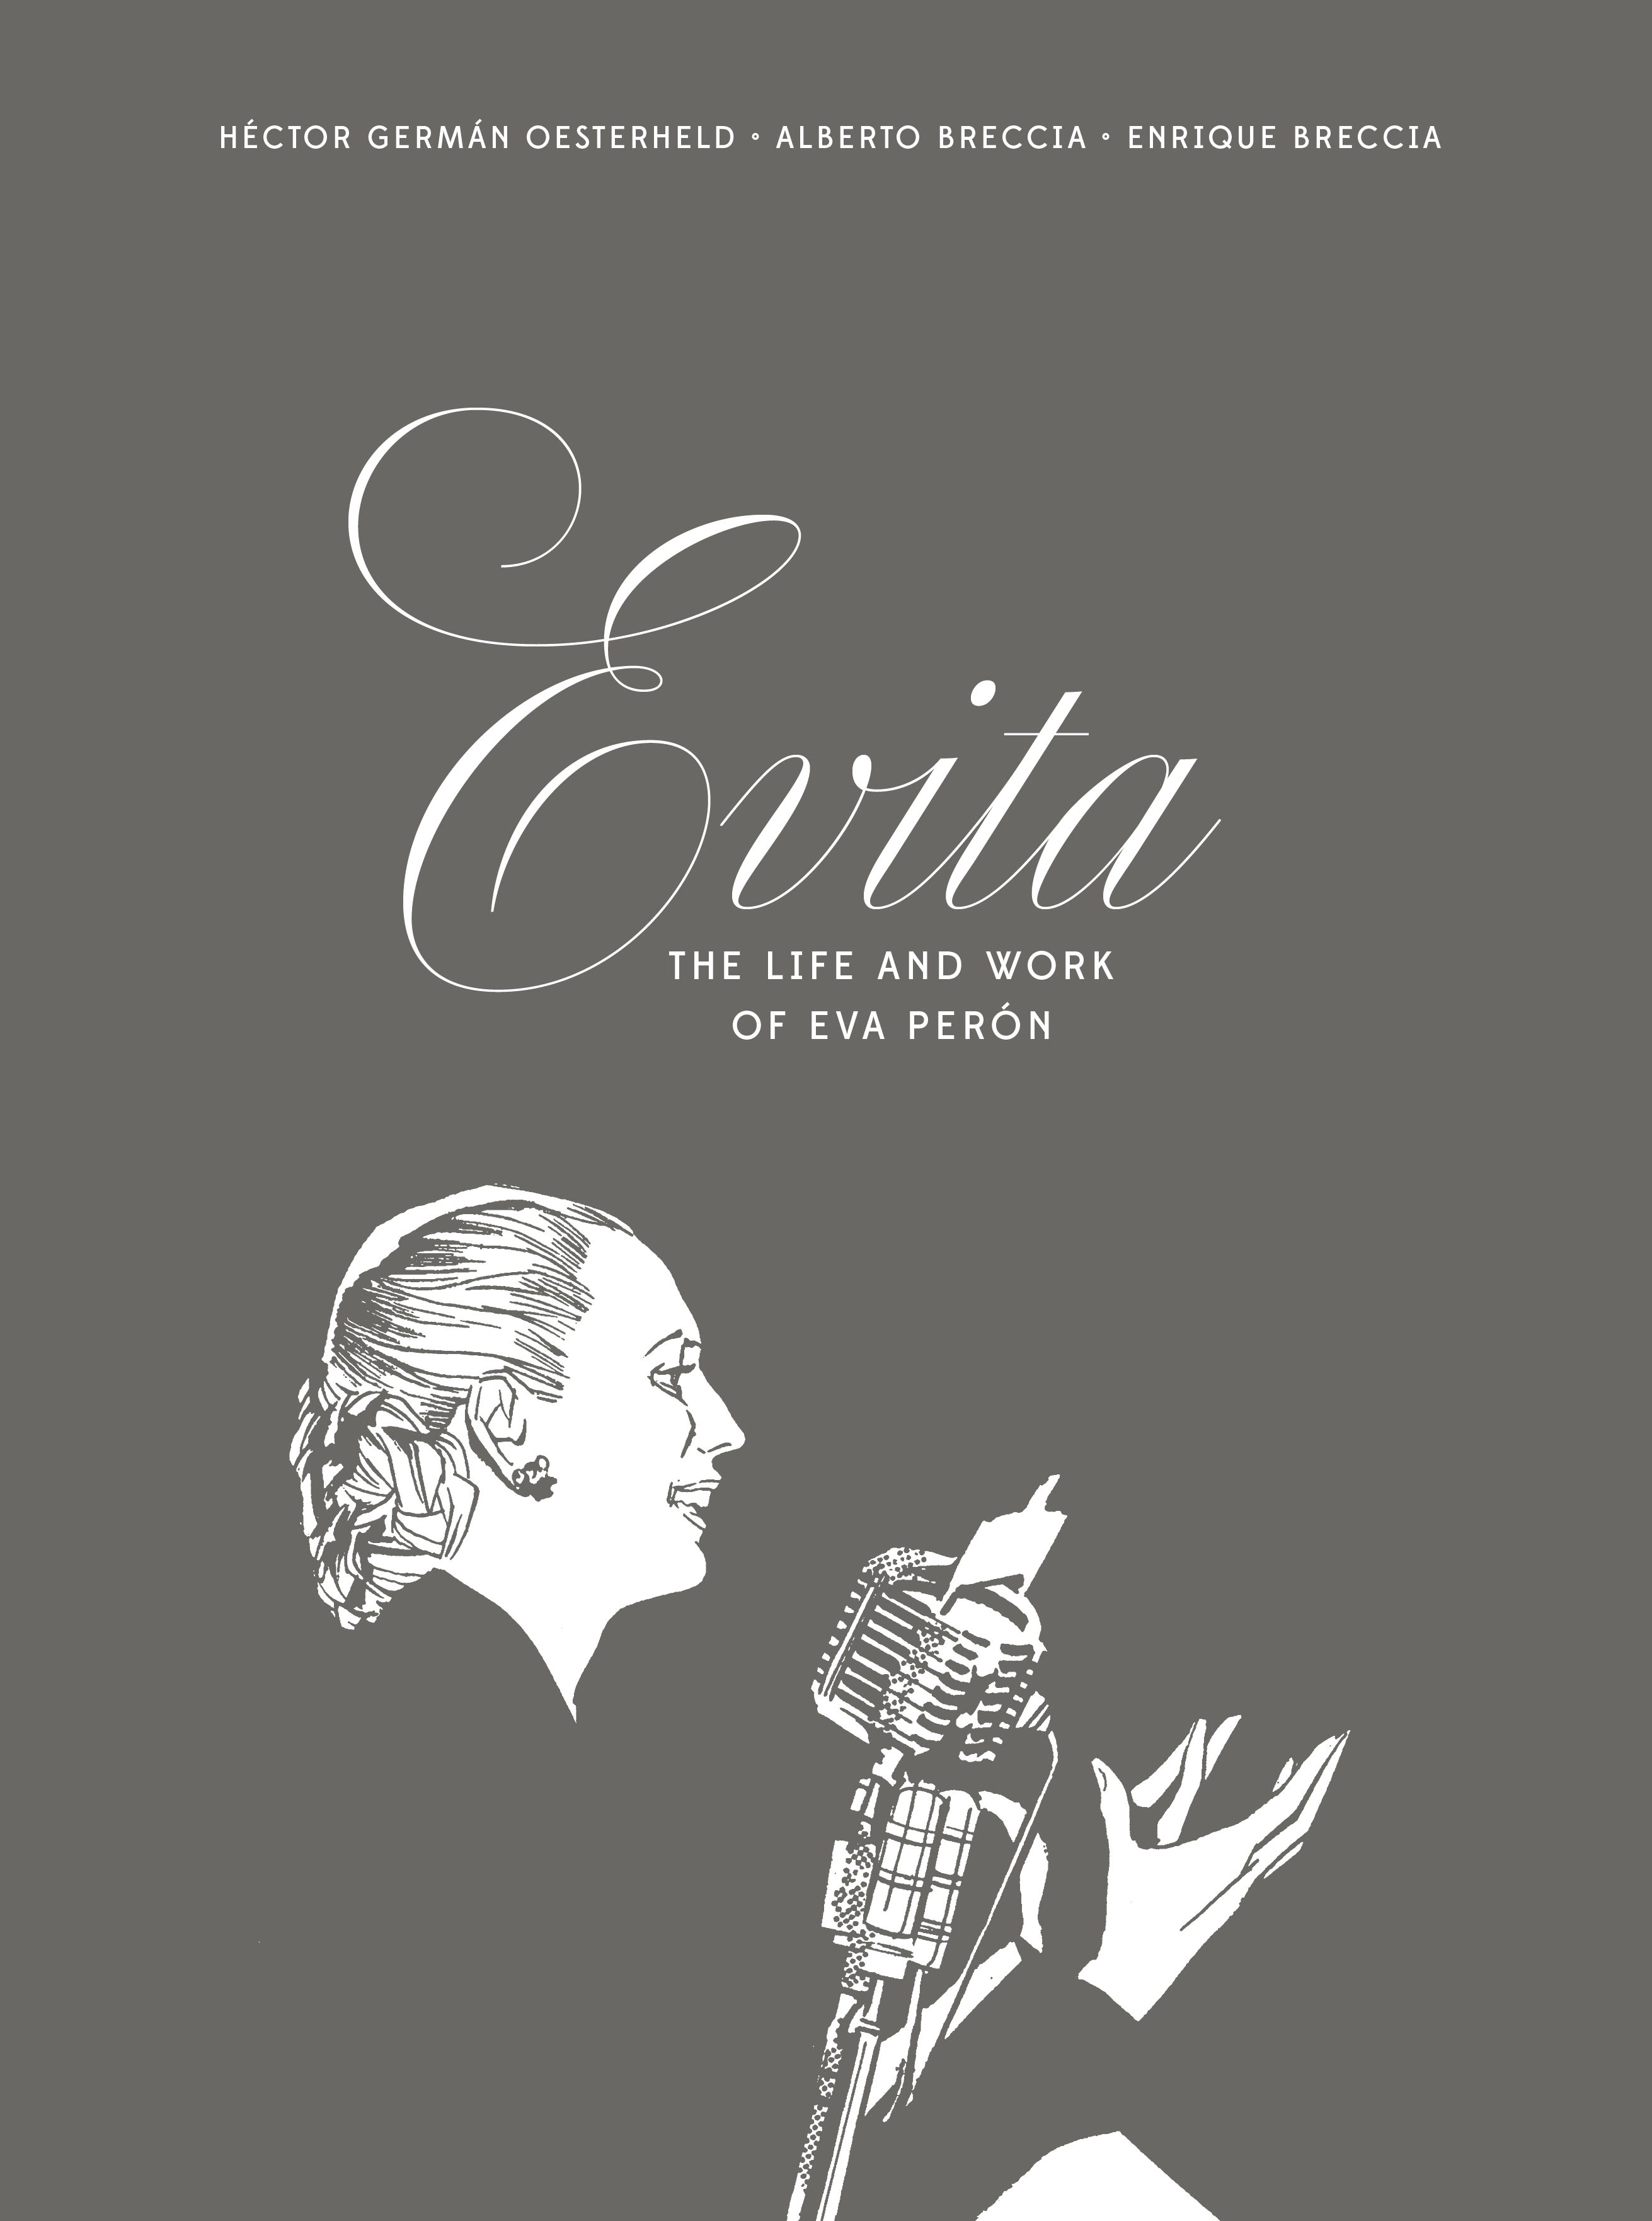 Read online Evita, the Life and Work of Eva Perón comic -  Issue # TPB - 1